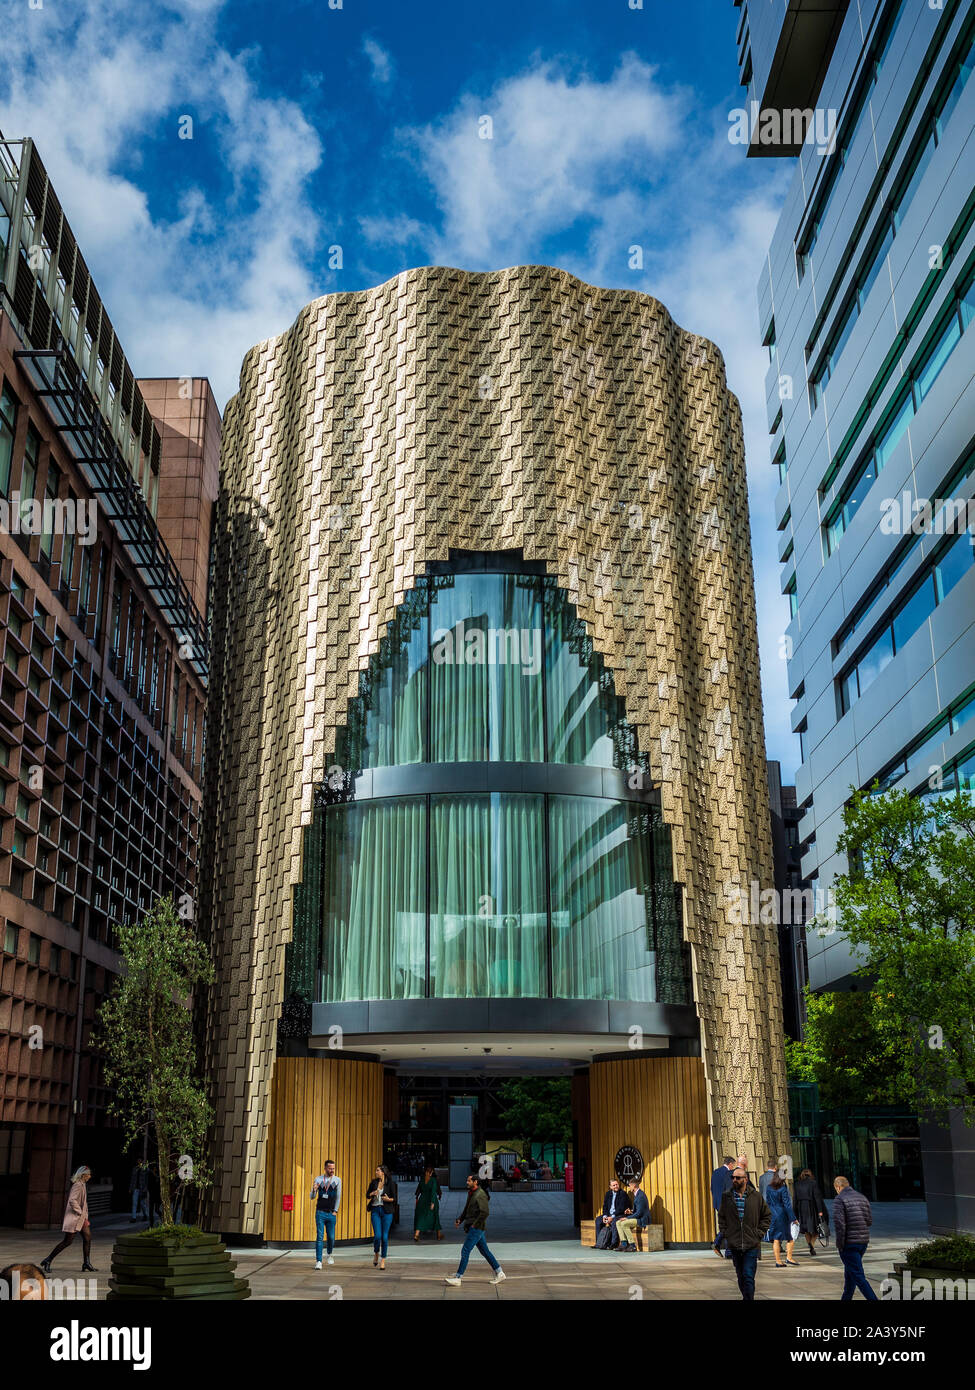 Three Broadgate, 3 Broadgate, redevelopment of the former marketing suite. Architect ORMS completed 2019. Stock Photo